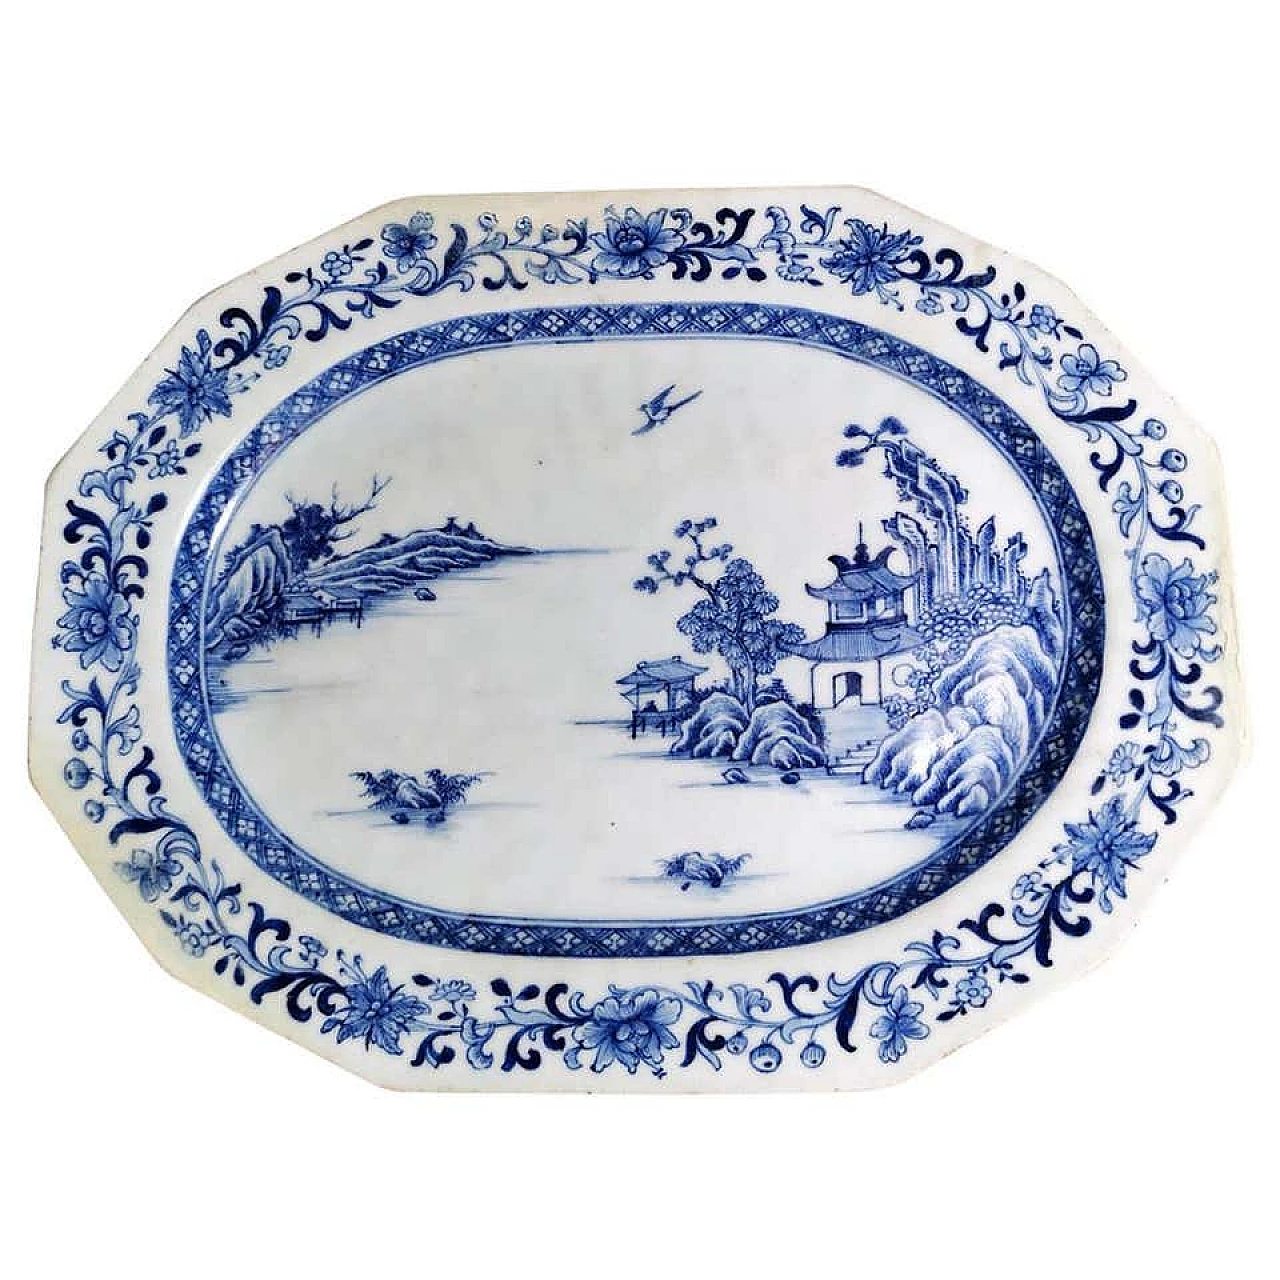 Hand painted Qing dynasty chinese porcelain tray in cobalt blue, 18th century 1186530